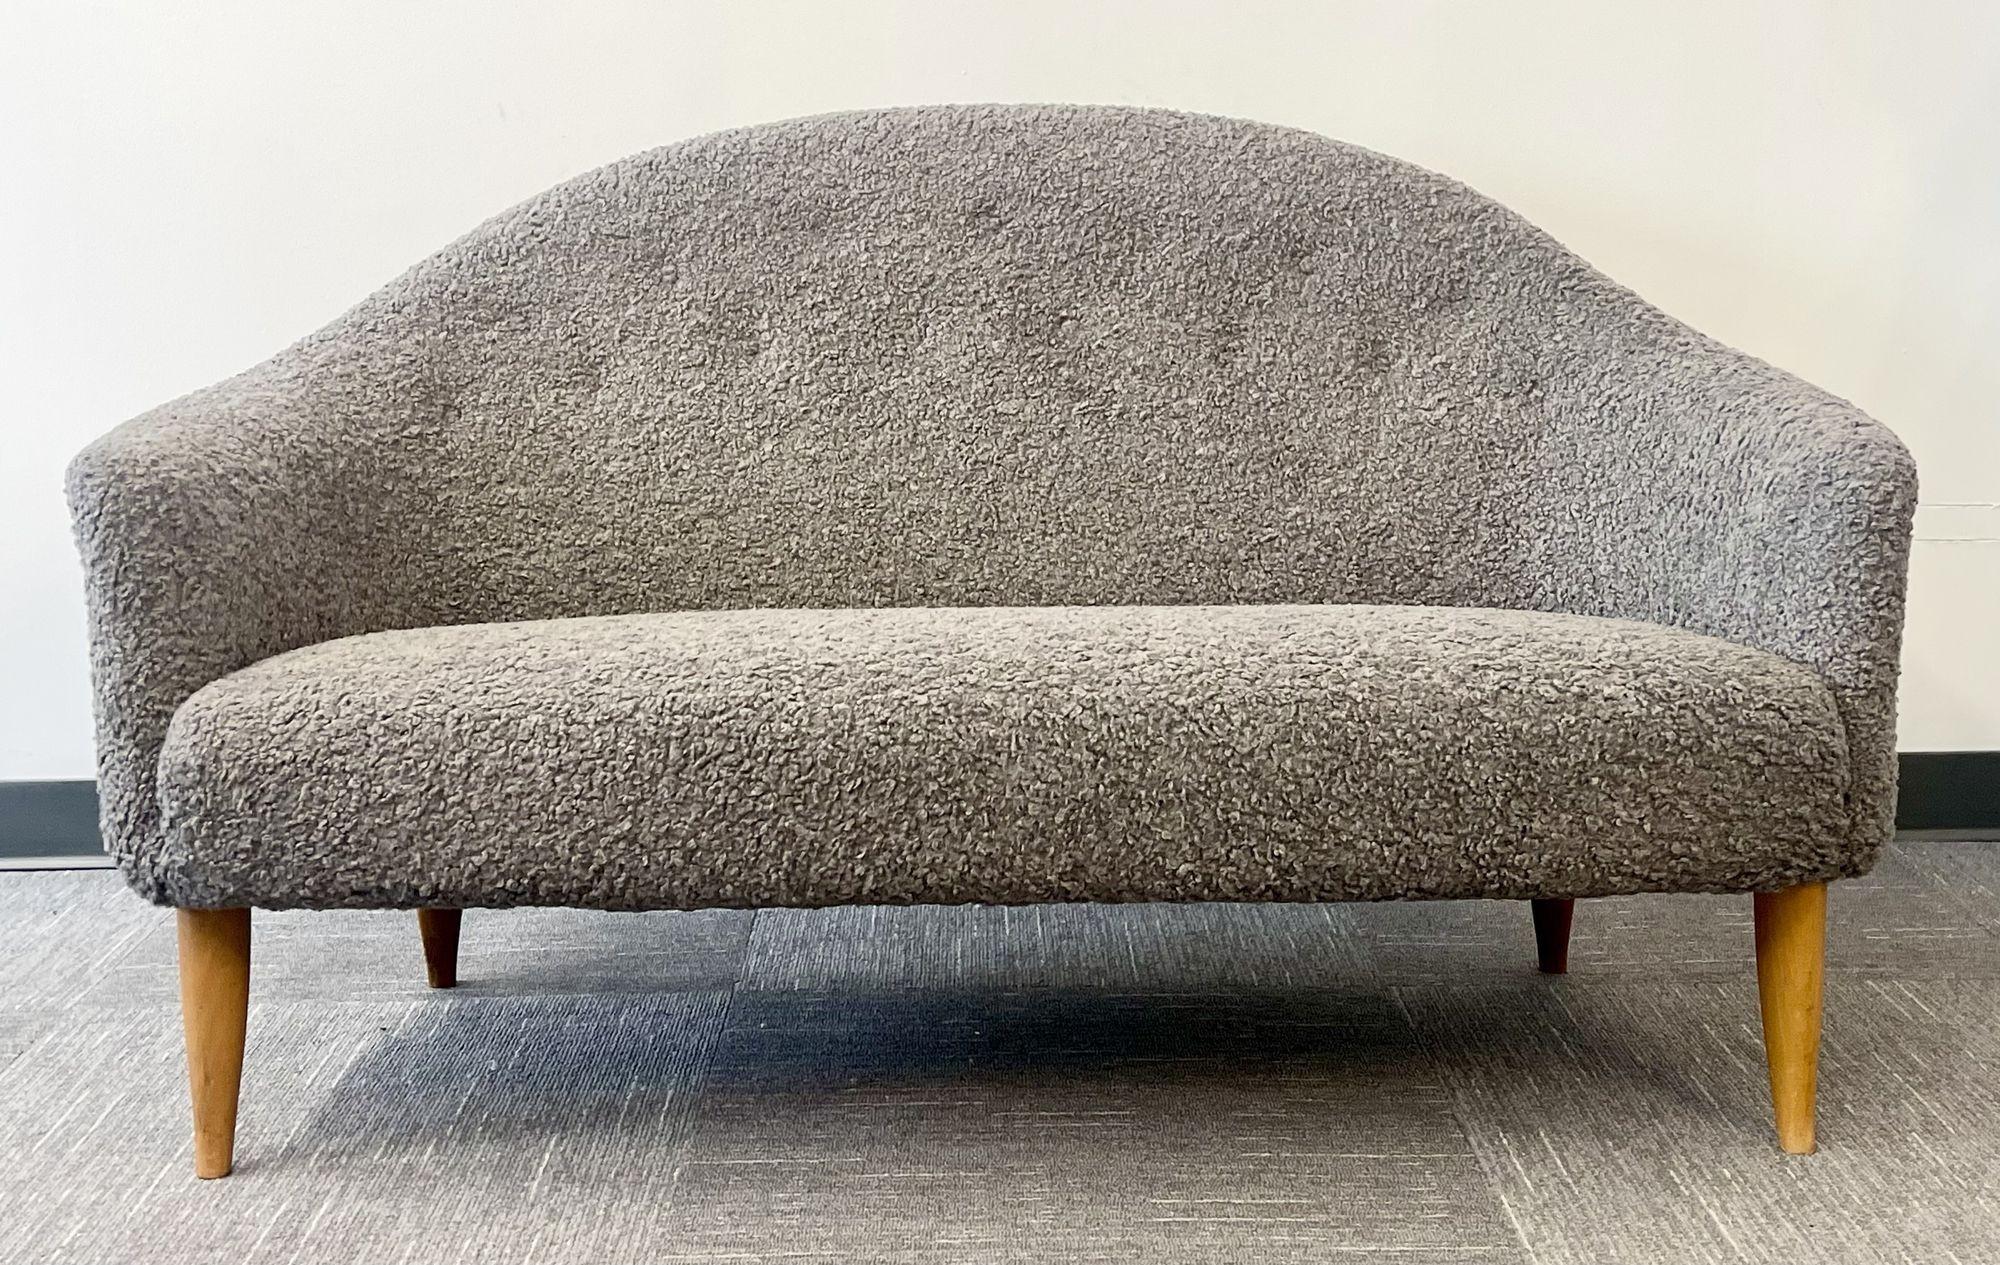 Swedish Mid-Century Modern 'Paradiset' Sofa by Kerstin Hörlin-Holmquist, Sheepskin
 
Chic minimalist sofa by famed Swedish designer referred to as 'Paradiset' or Paradise - for obvious reasons, of course! Later neutral grey sheepskin decorates the